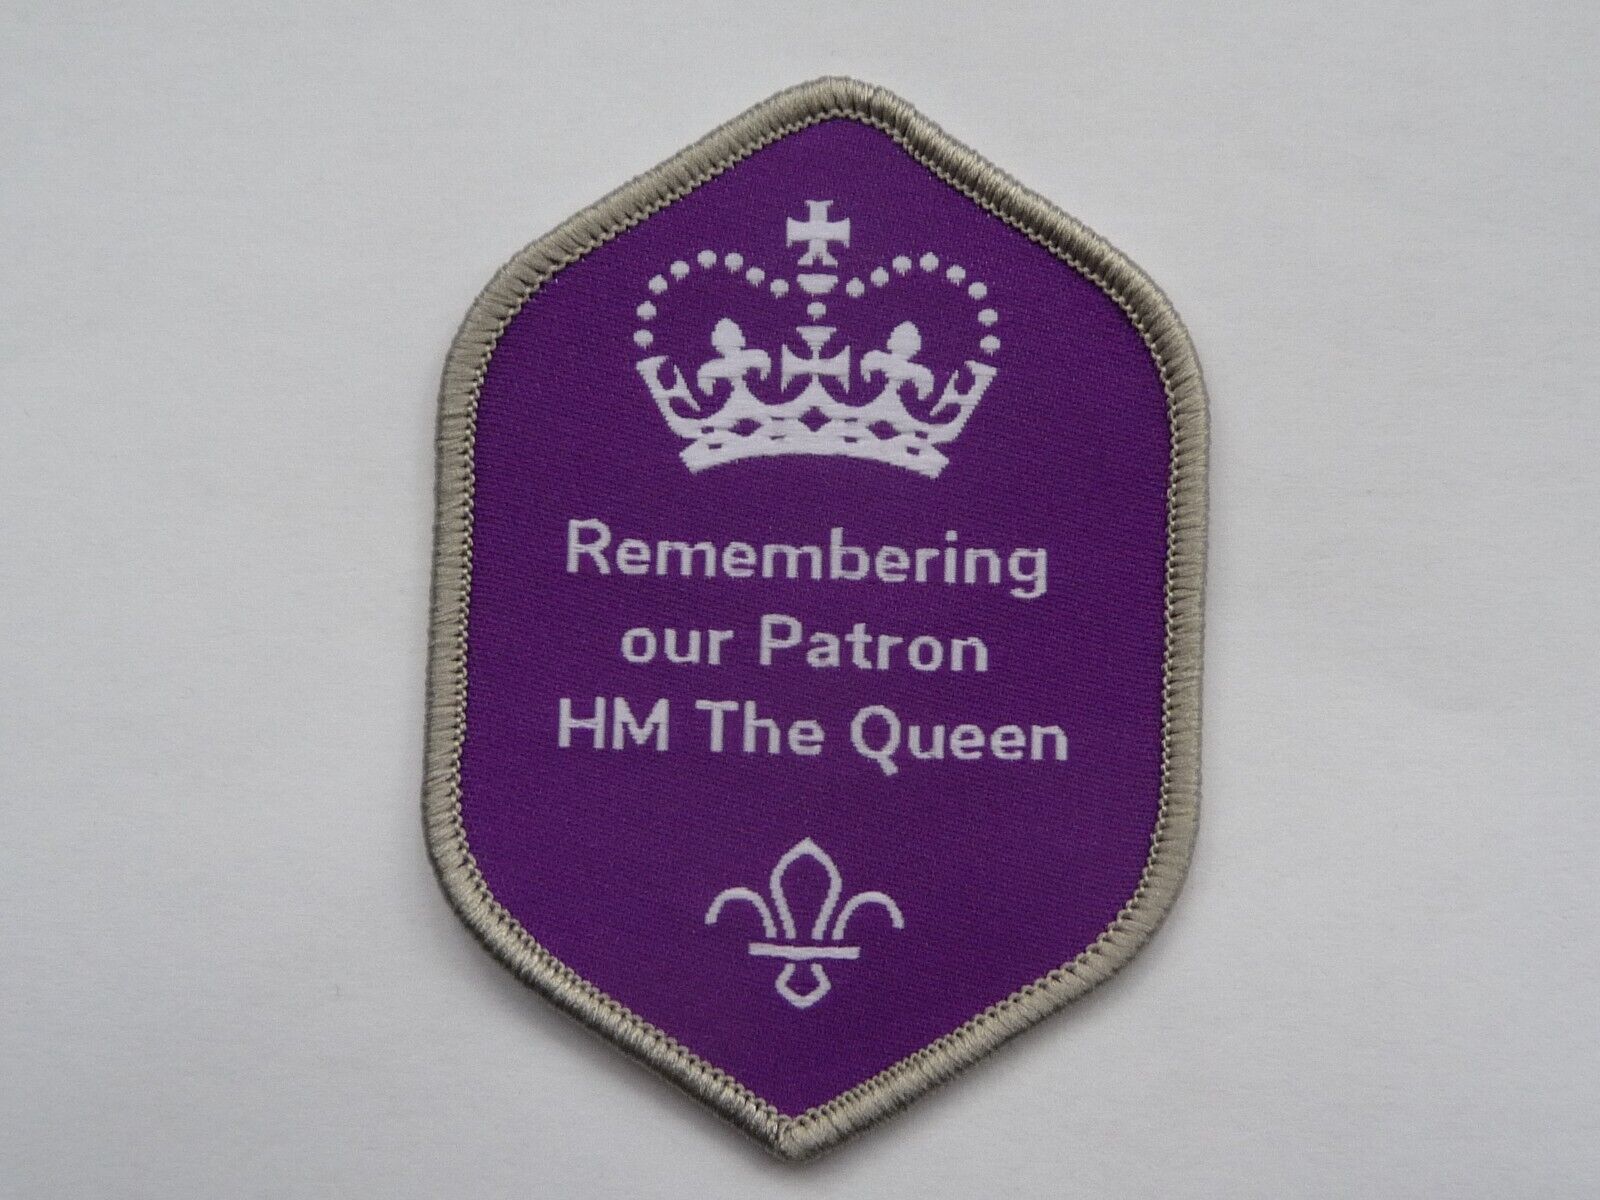 UK Scouting Official Uniform Memorial Badge Remembering Our Patron HM The Queen